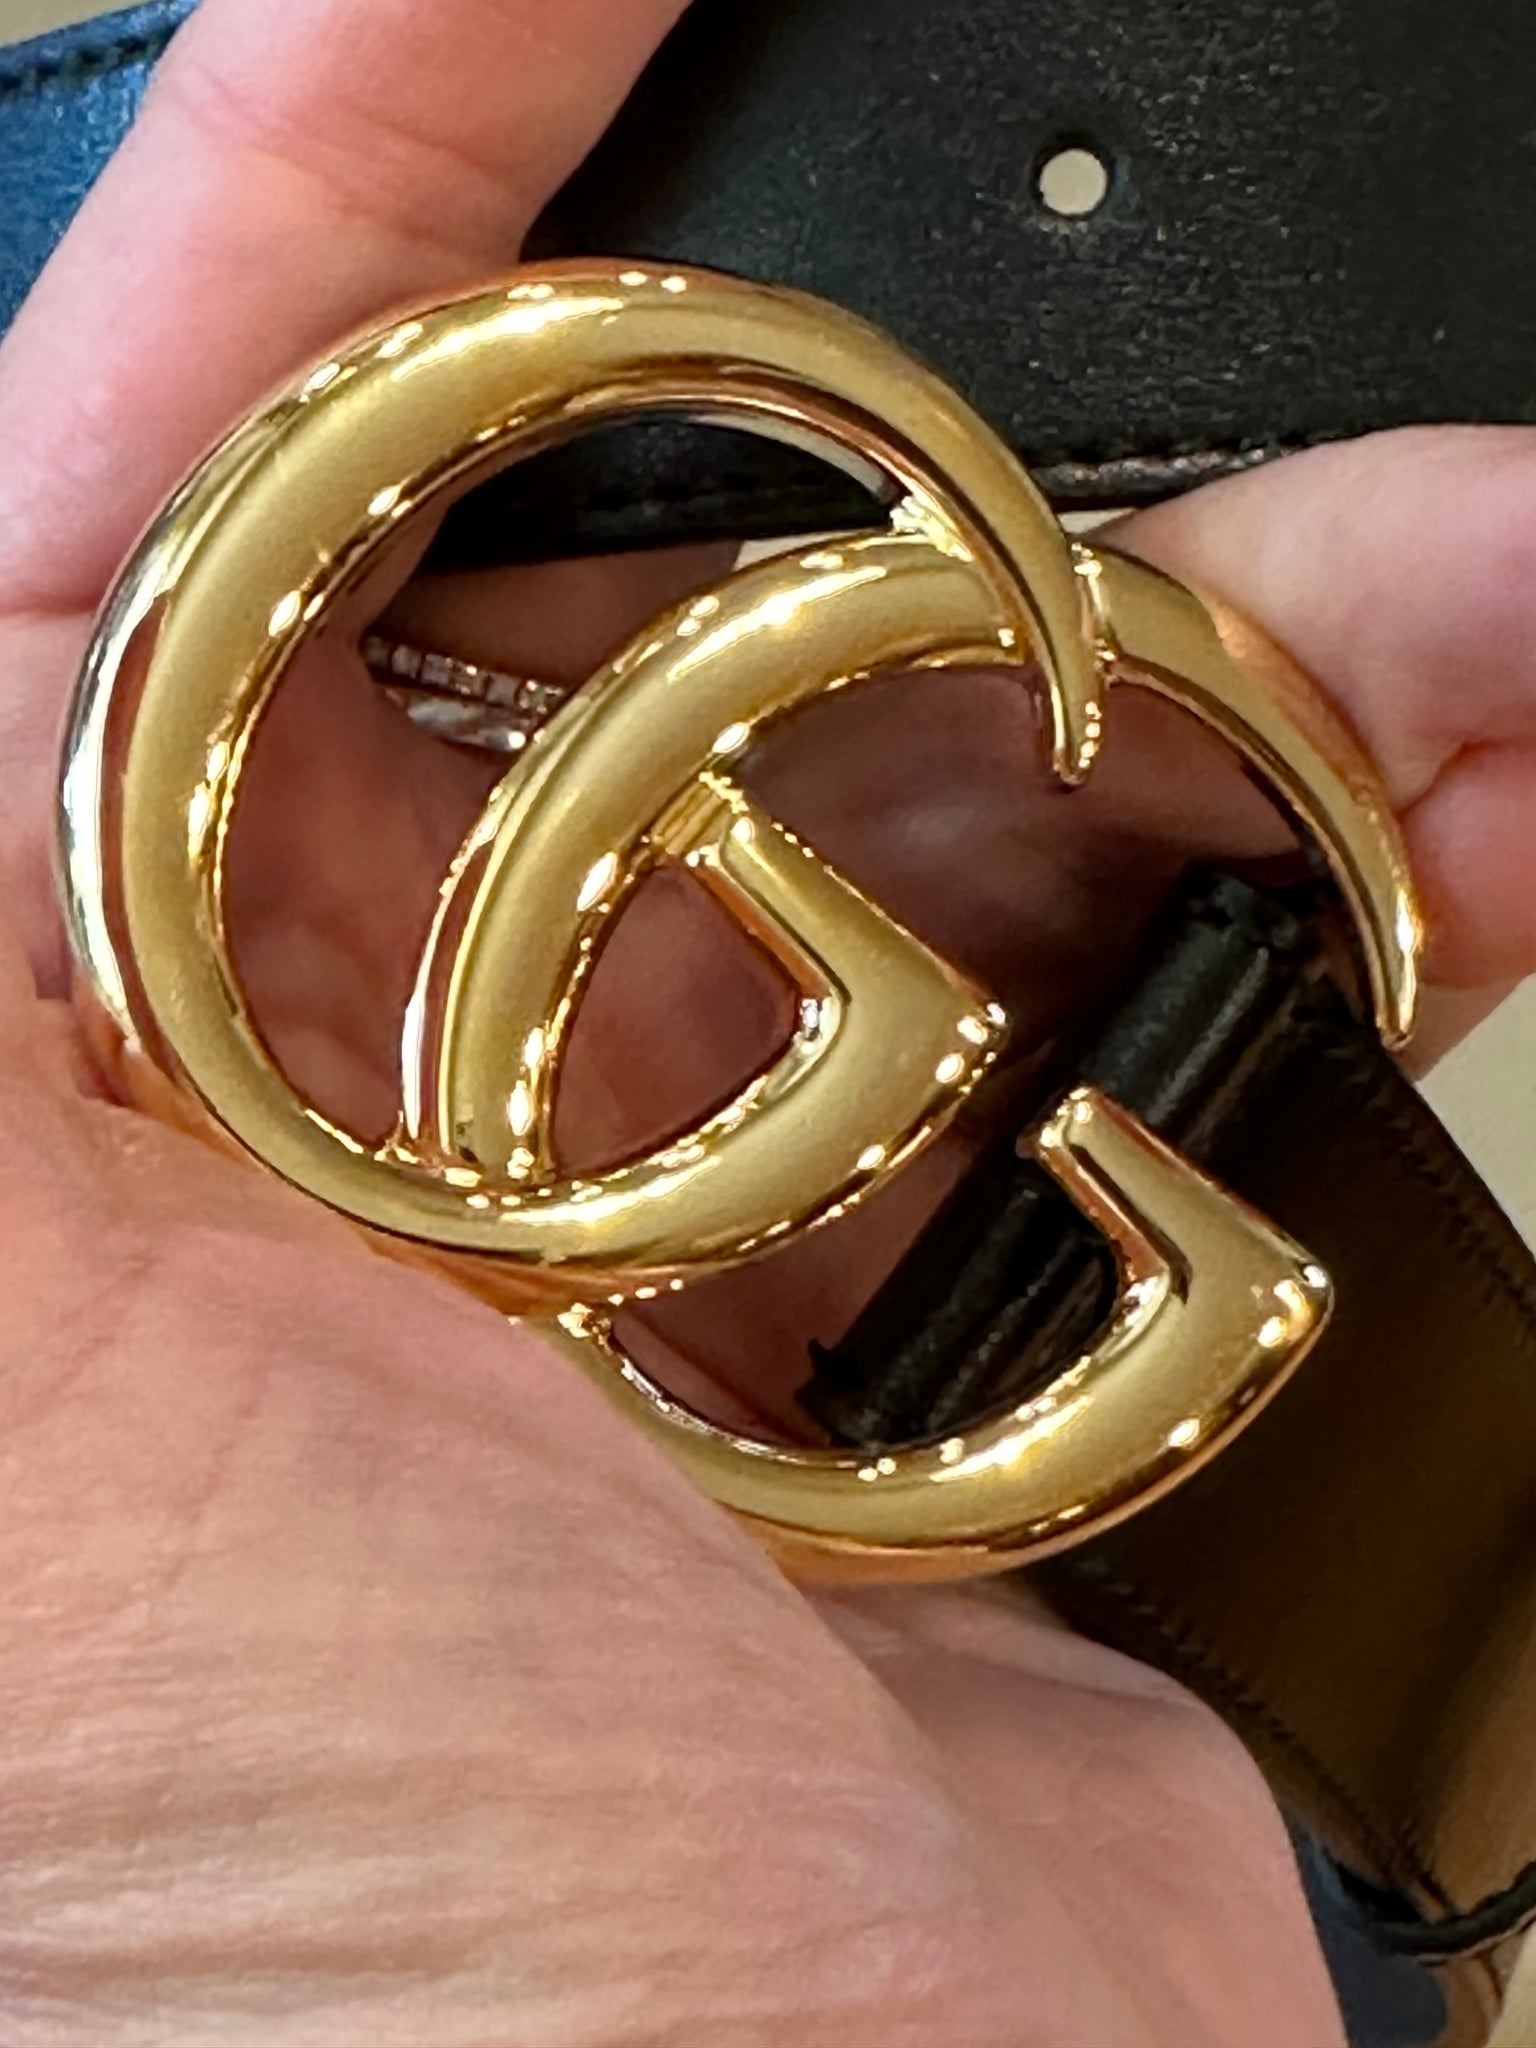 Gucci belt real vs fake review. How to spot original Gucci GG gucissima  belts 